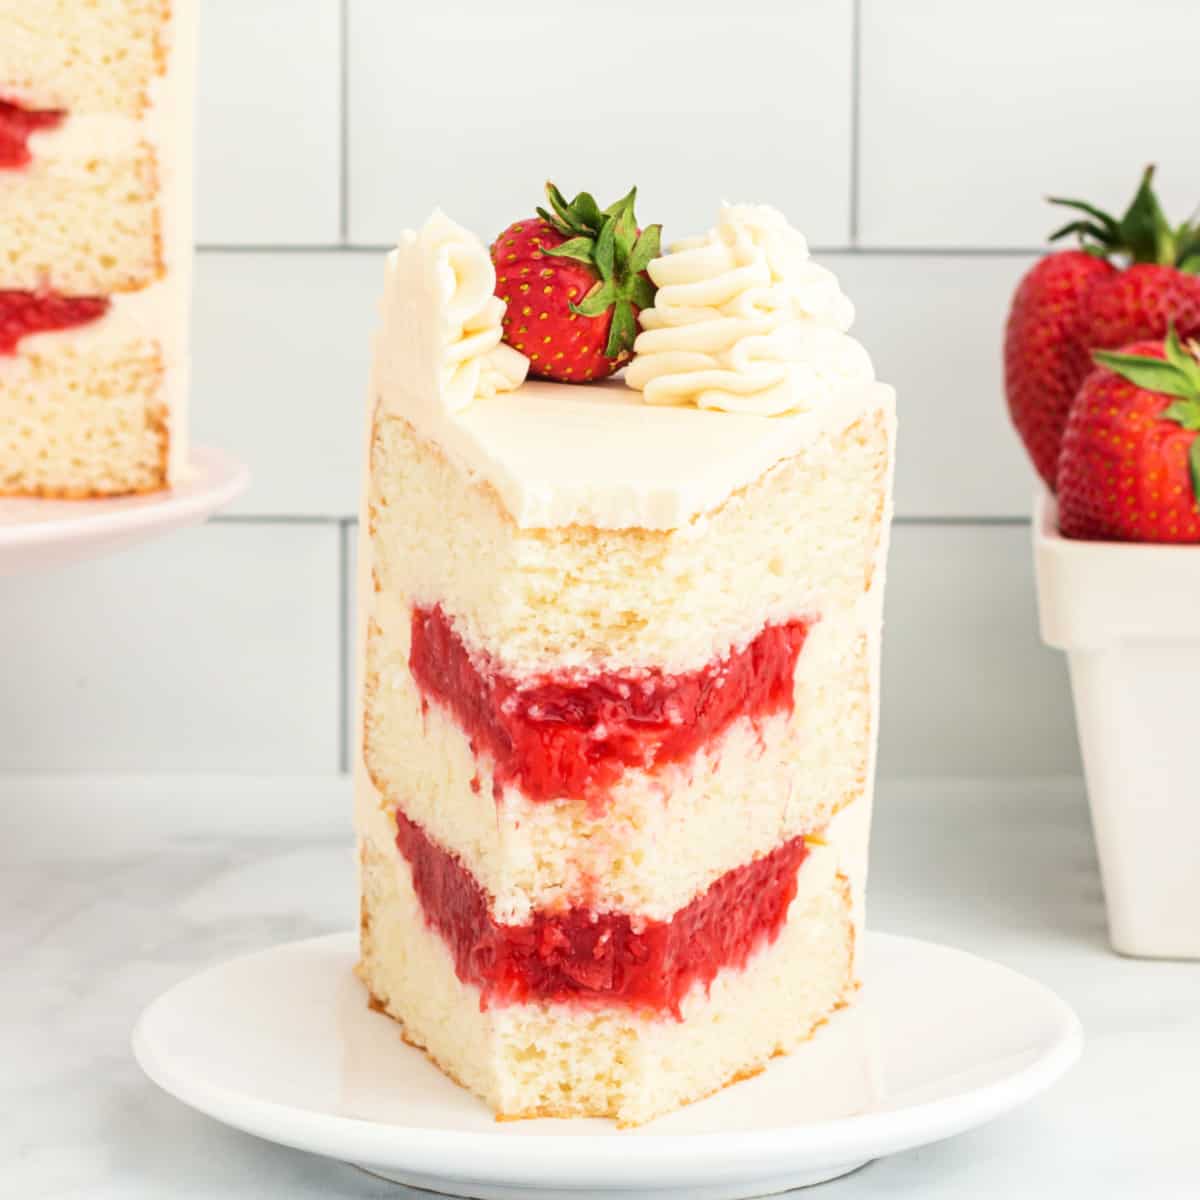 Vanilla Cake with Strawberry Filling Recipe - The Cookie Rookie®